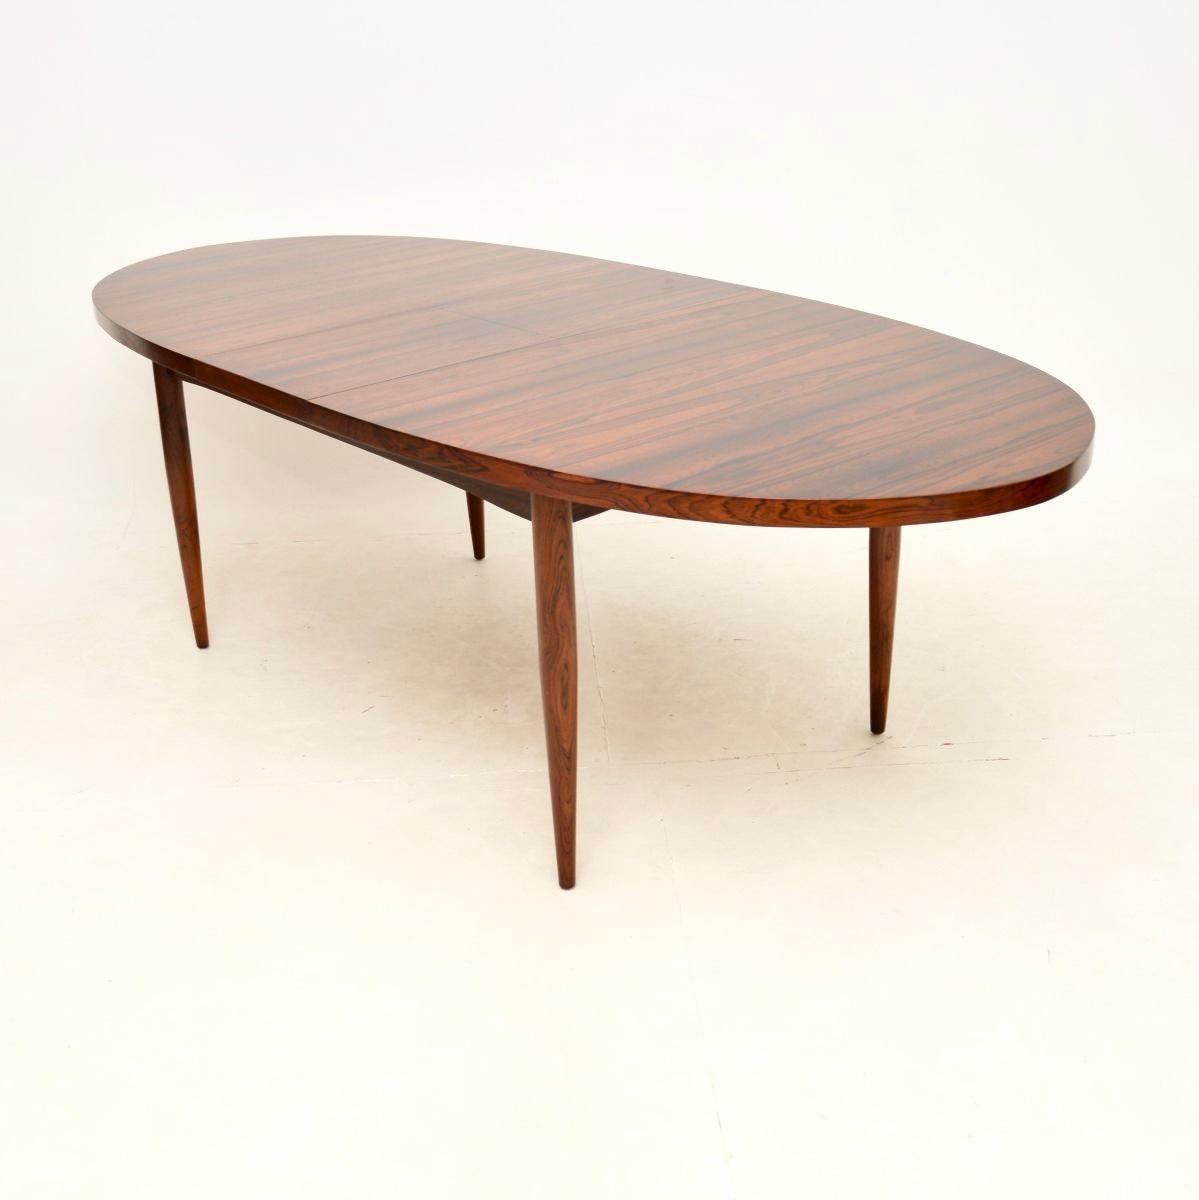 Mid-20th Century Danish Vintage Dining Table For Sale